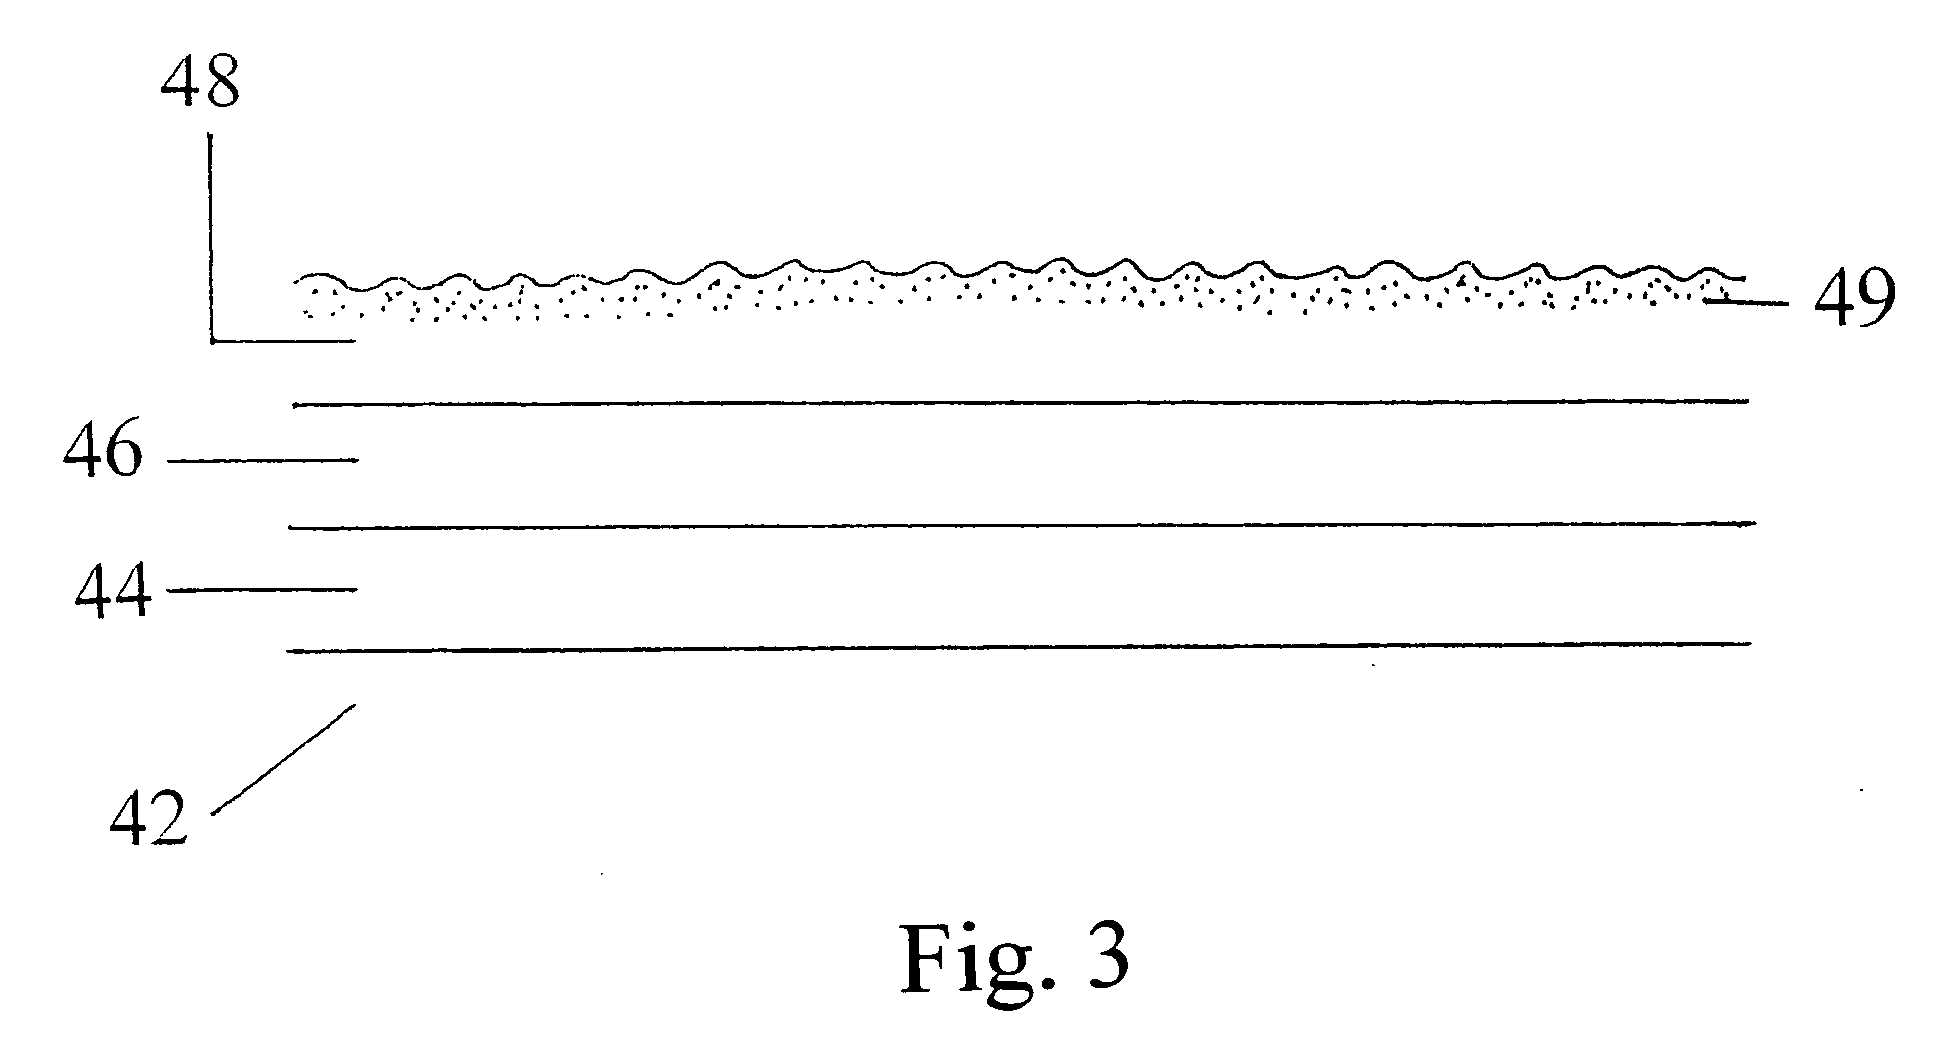 Catalysts having catalytic material applied directly to thermally-grown alumina and catalytic methods using same, improved methods of oxidative dehydrogenation